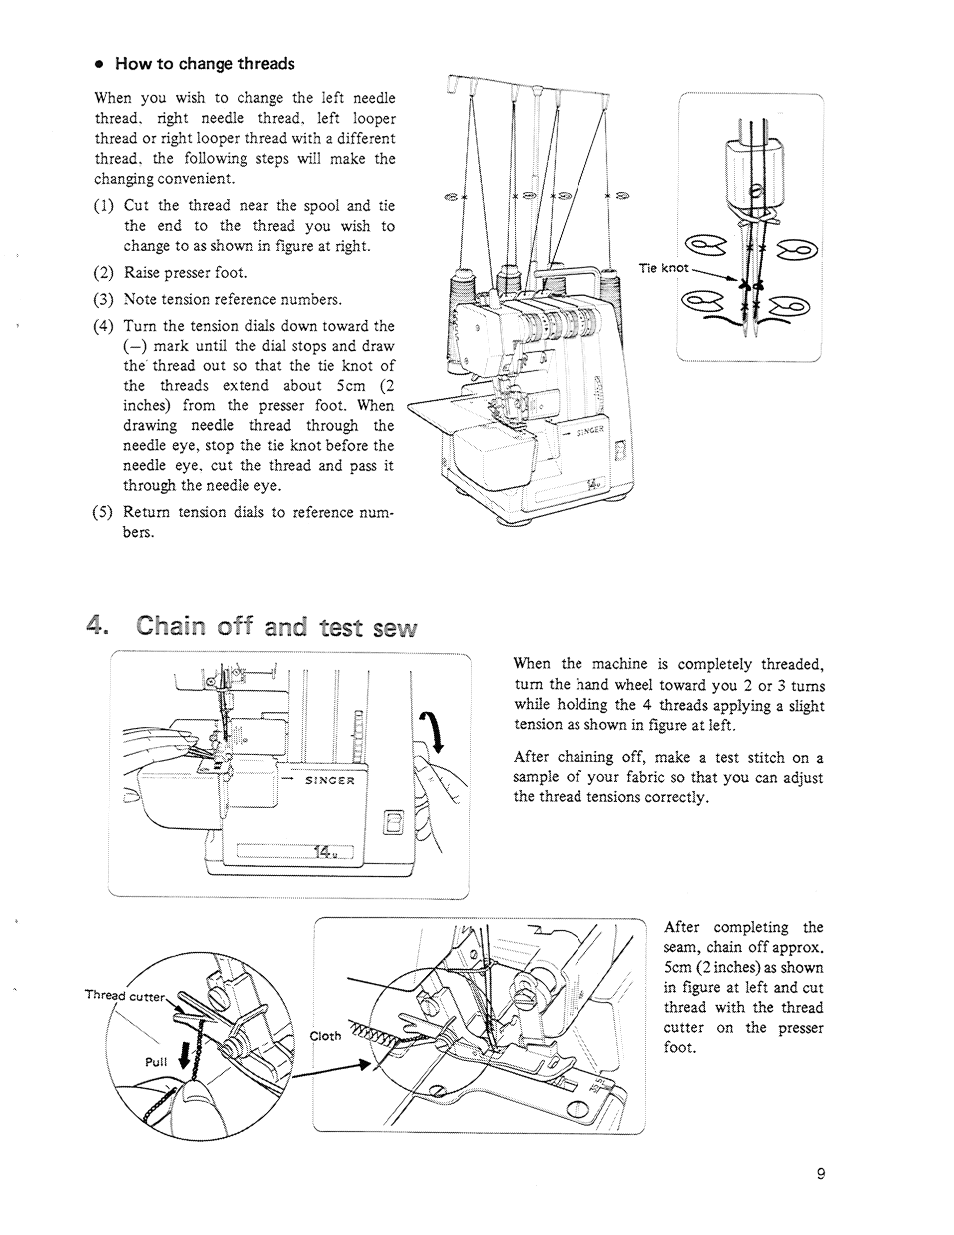 M how to change threads, Chair, off and test sew, How to | Change threads, Chain off and test sew | SINGER 14U64A User Manual | Page 11 / 28